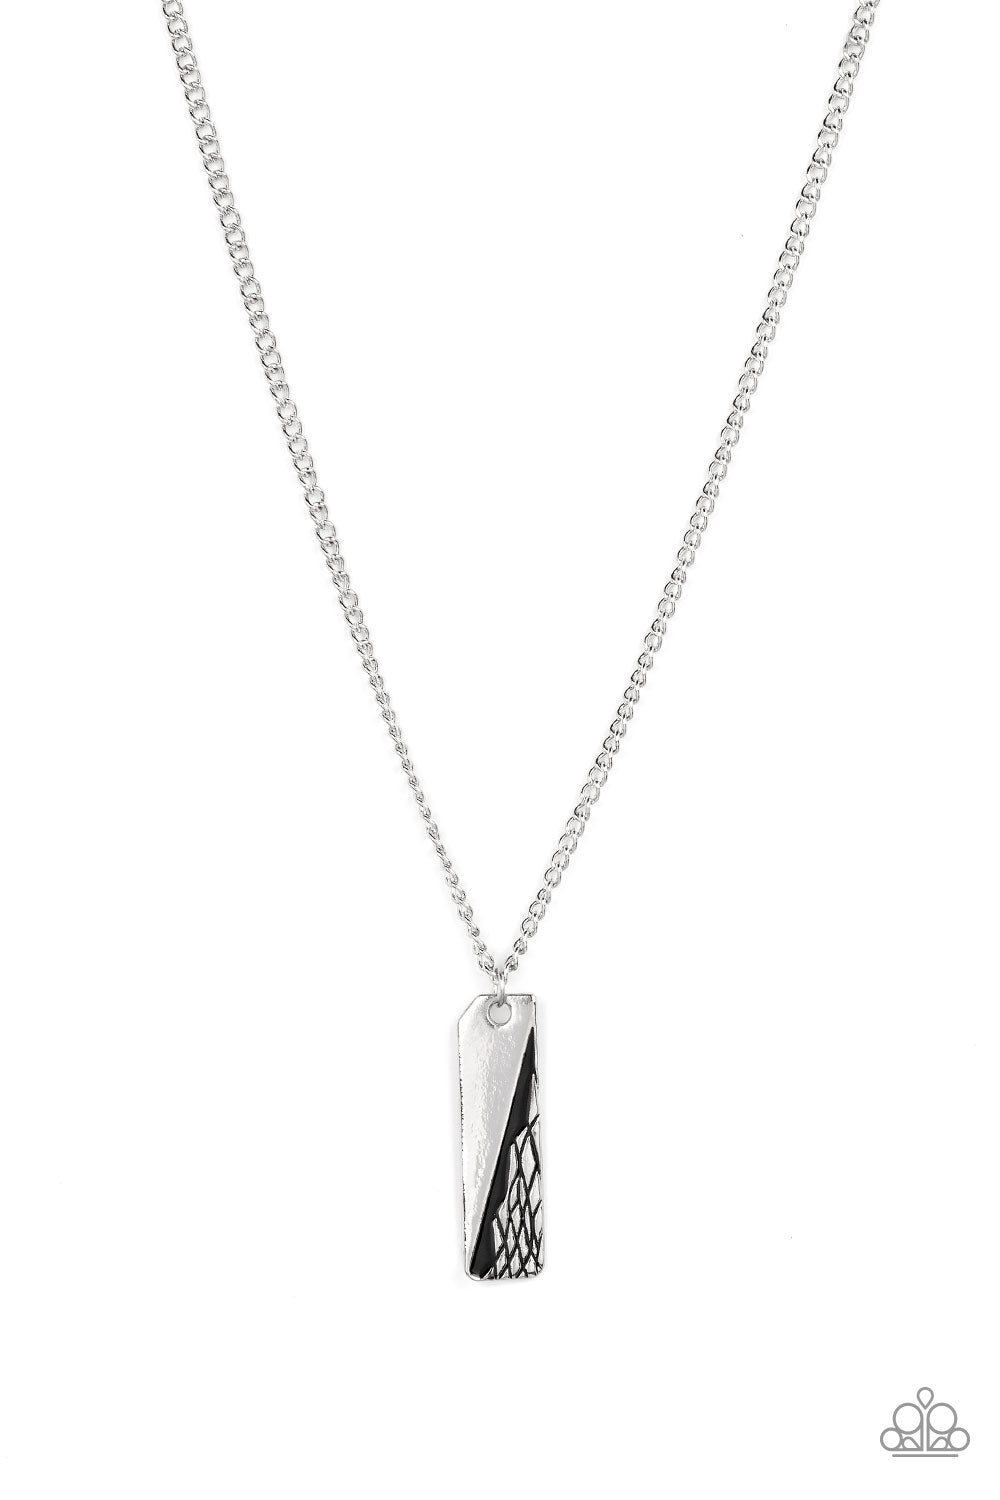 tag-along-silver-mens necklace